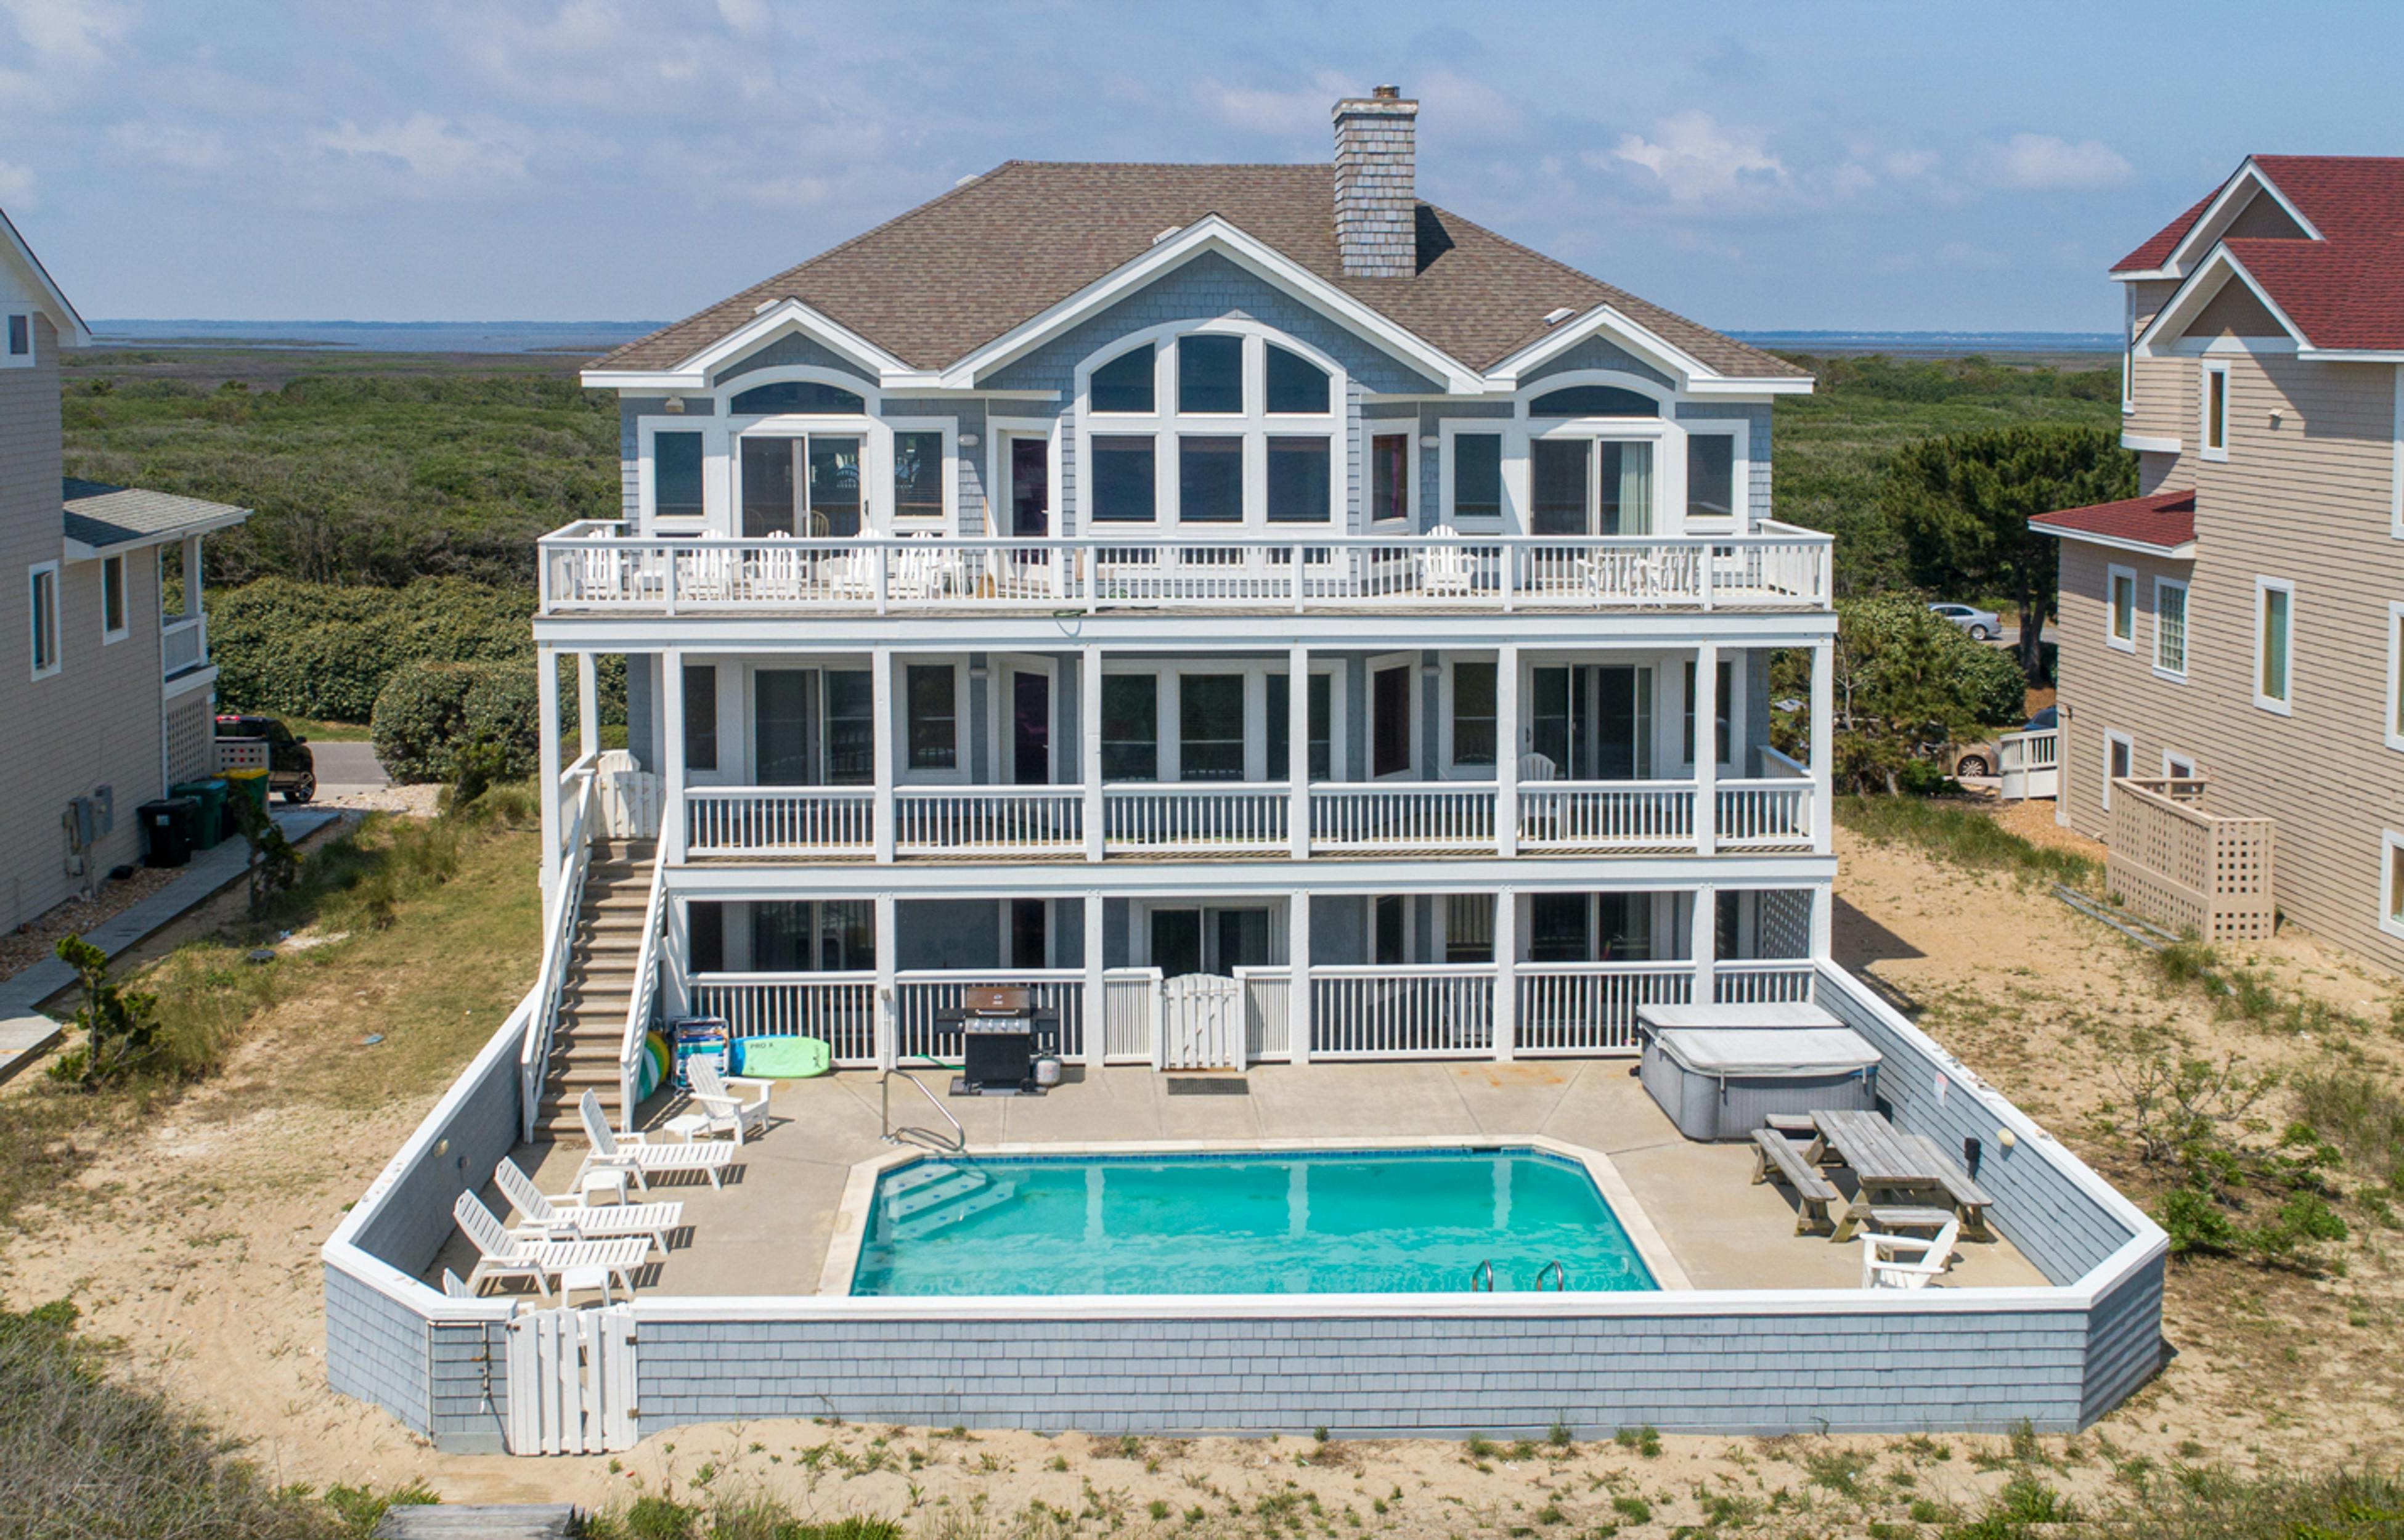 Three story vacation home rental in Outer Banks, NC with an outdoor pool, hot tub and pool amenities.